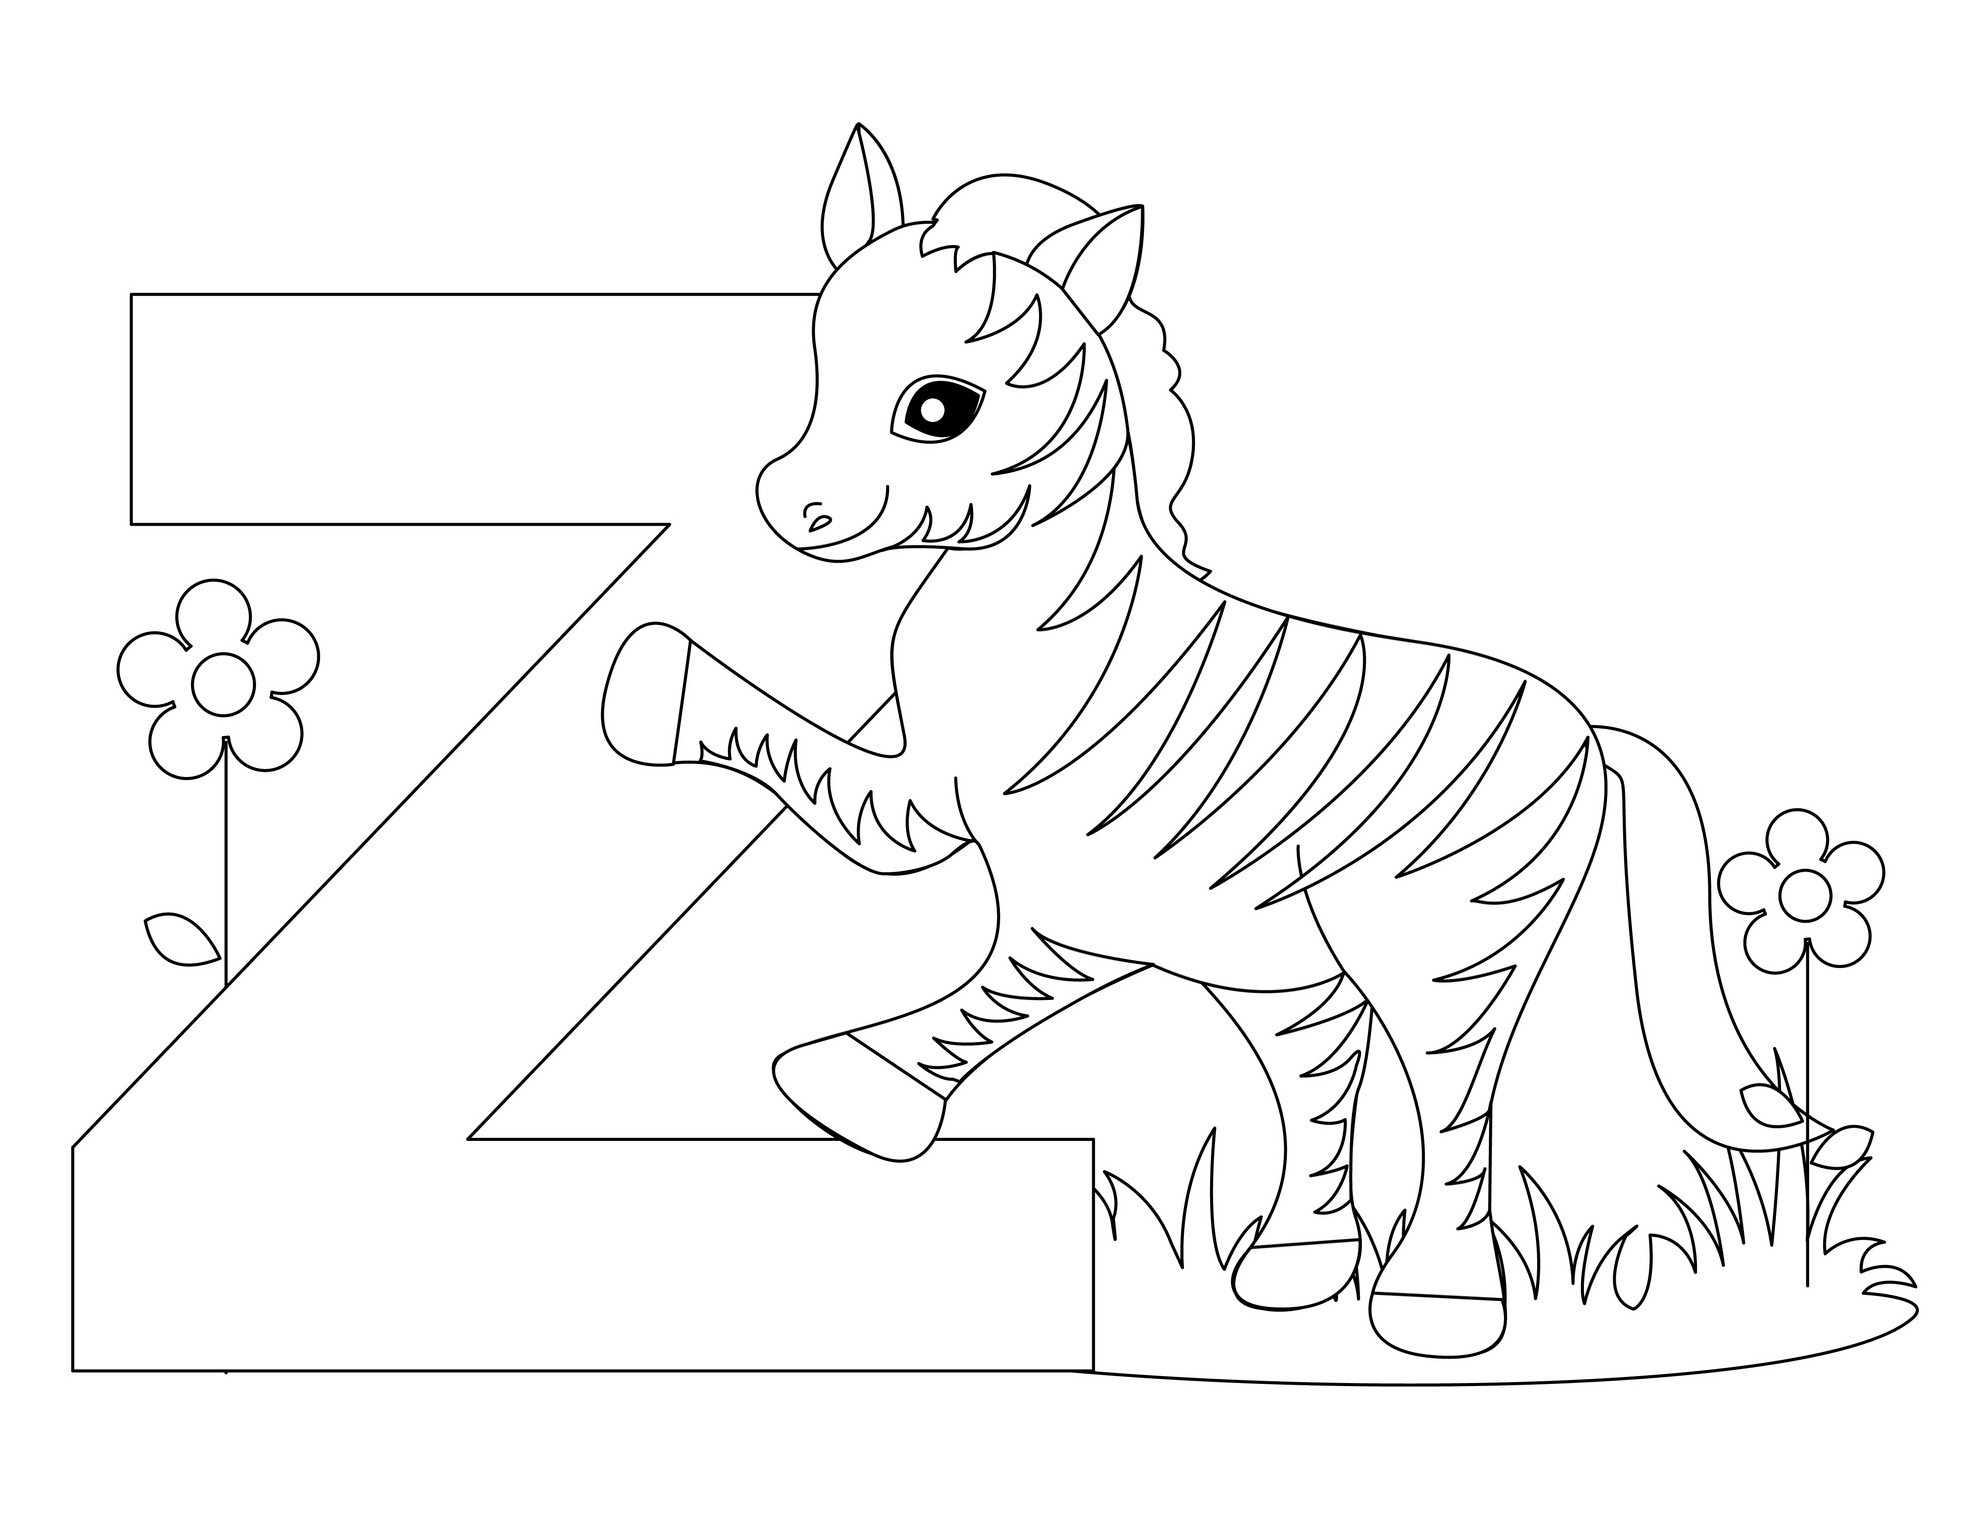 letter-z-alphabet-coloring-pages-3-free-printable-versions-supplyme